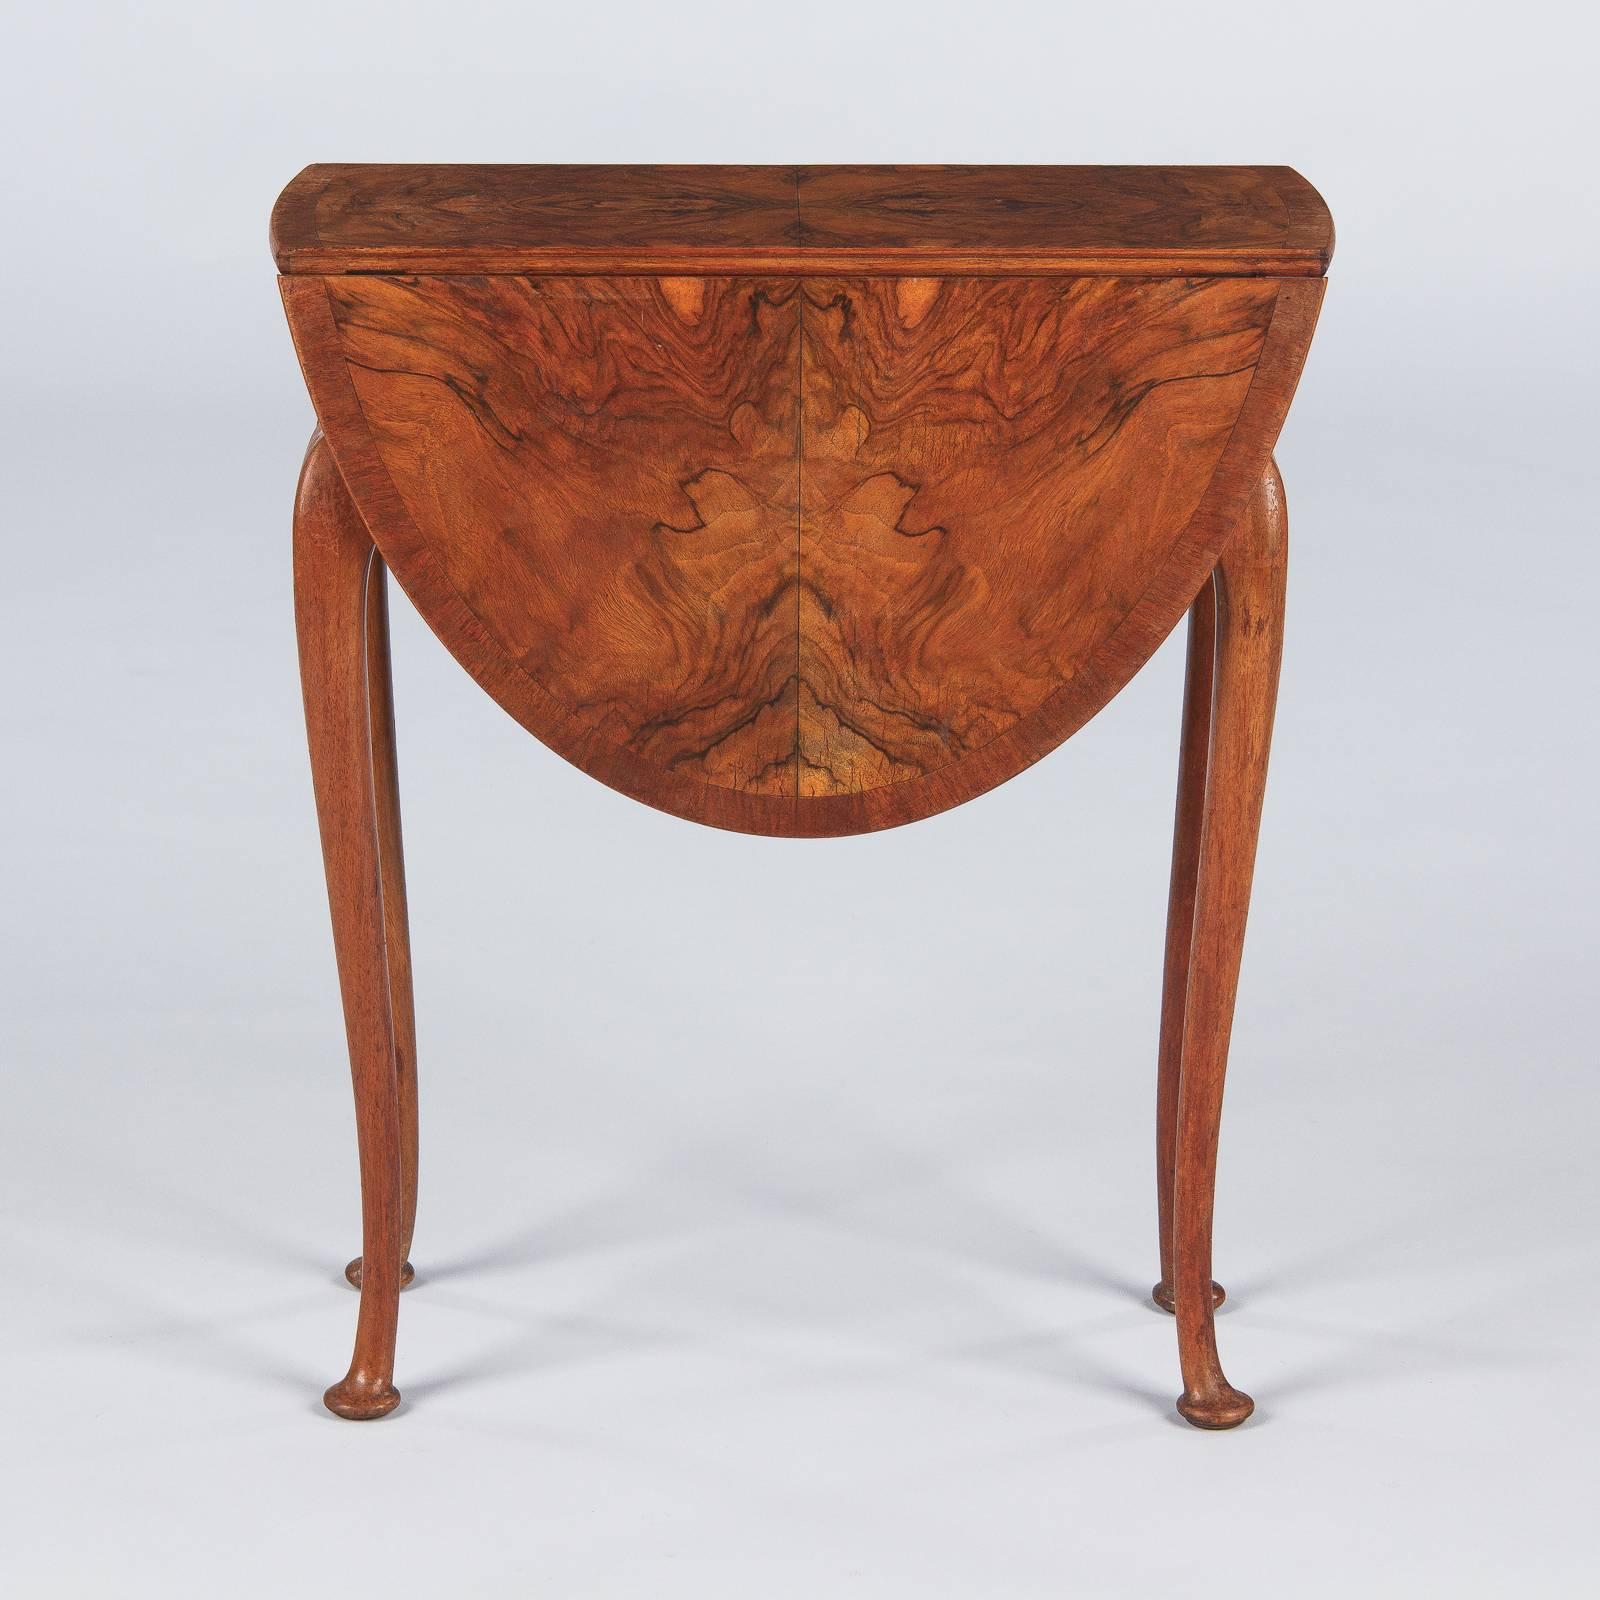 English Queen Anne Style Petite Drop-Leaf Table, England, Late 1800s